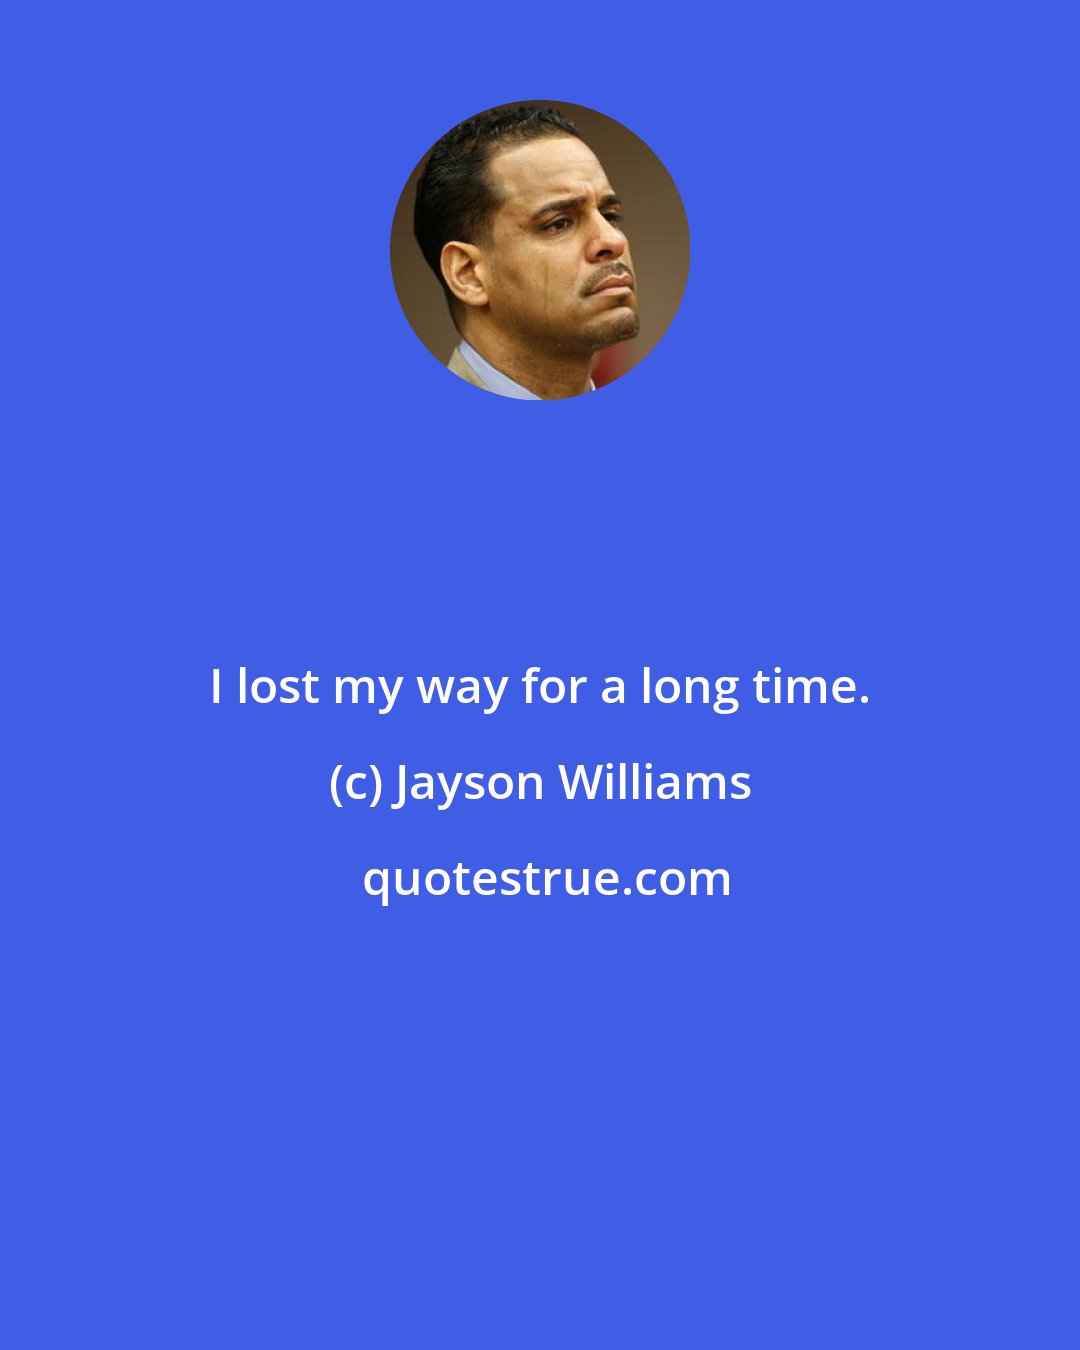 Jayson Williams: I lost my way for a long time.